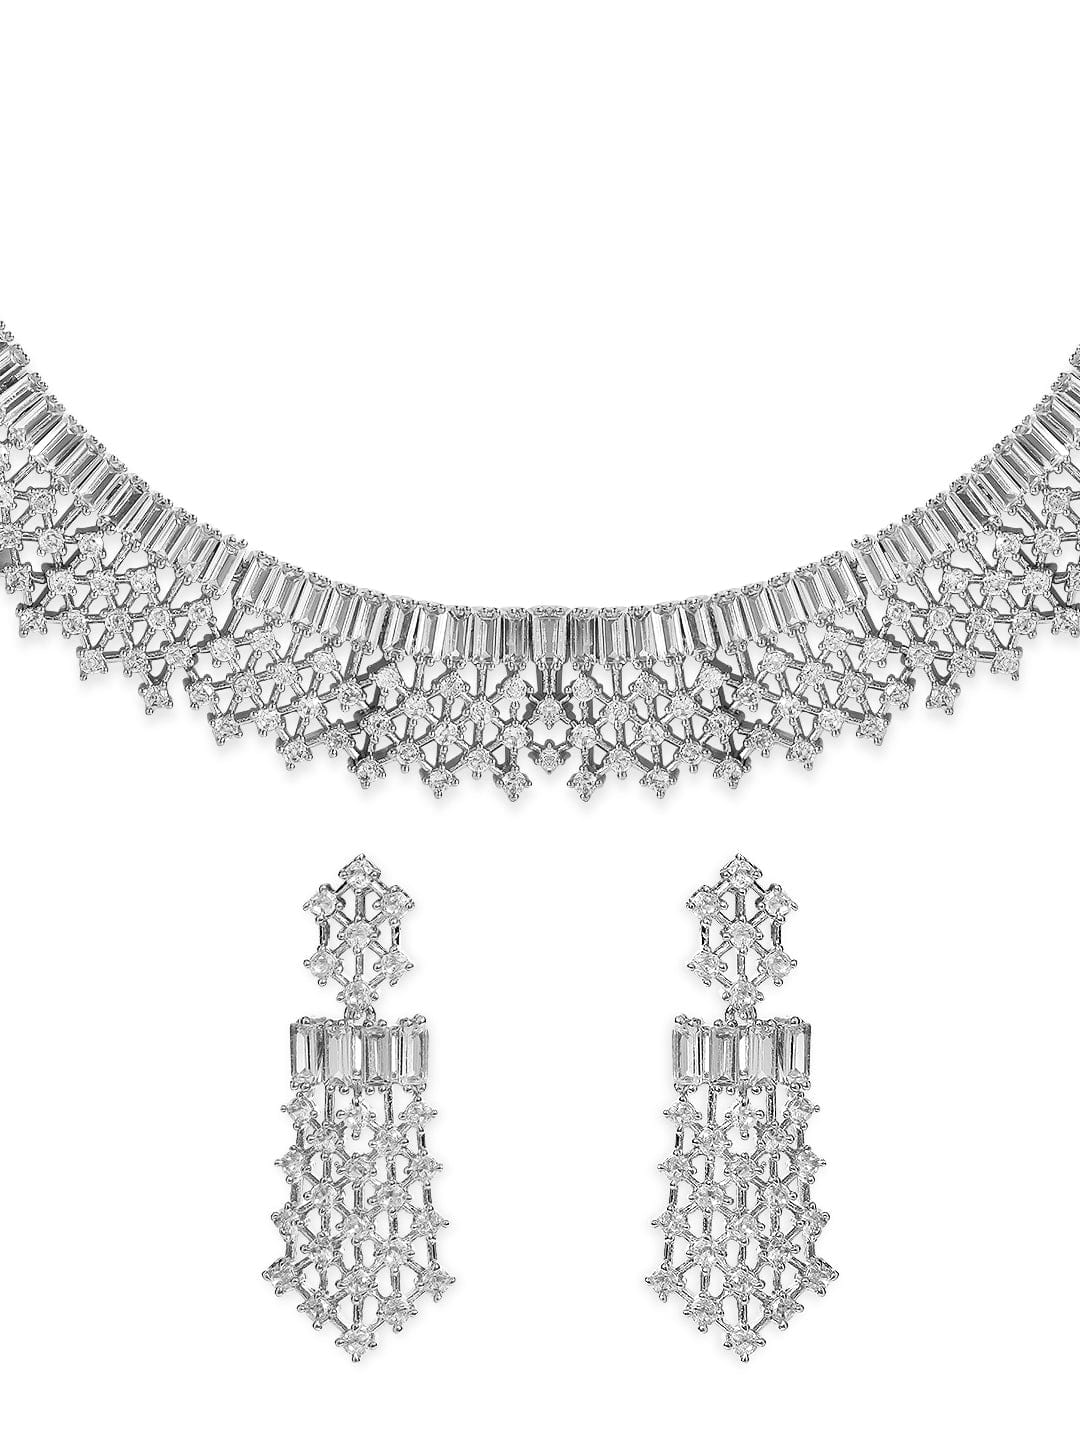 Rubans Silver Plated Necklace Set With Studded American Diamonds. Necklace Set